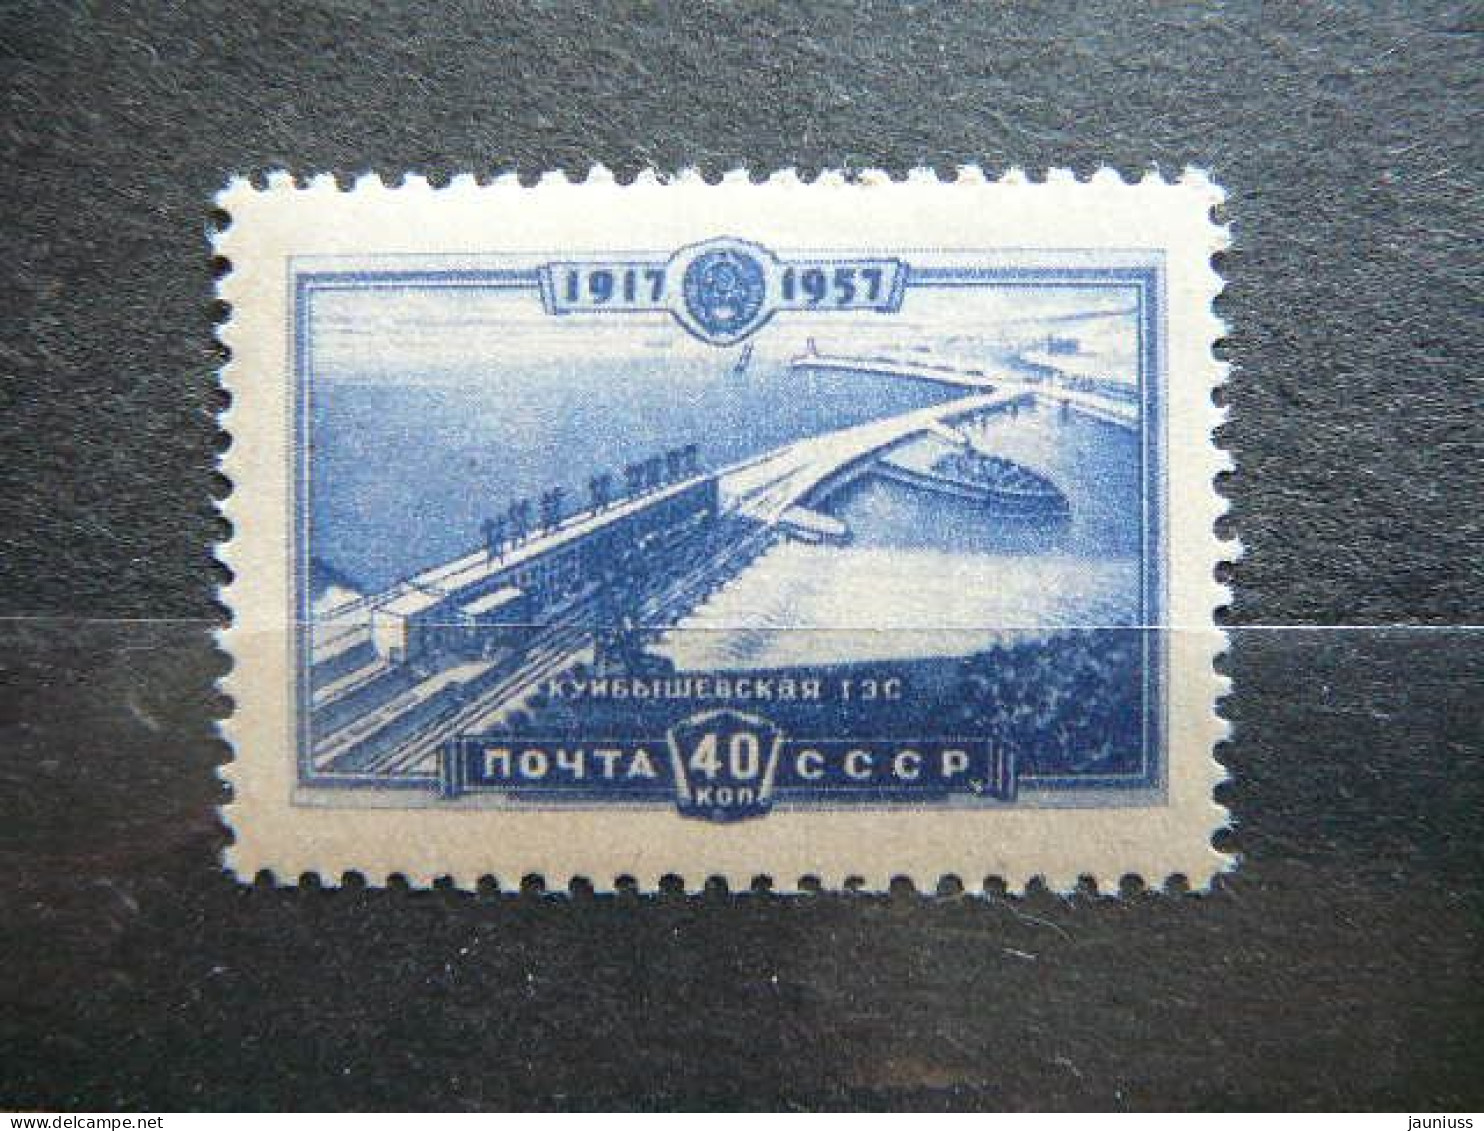 Volga Hydro-Electric Station # Russia USSR Sowjetunion # 1957 MNH # Mi.2037 - Unused Stamps